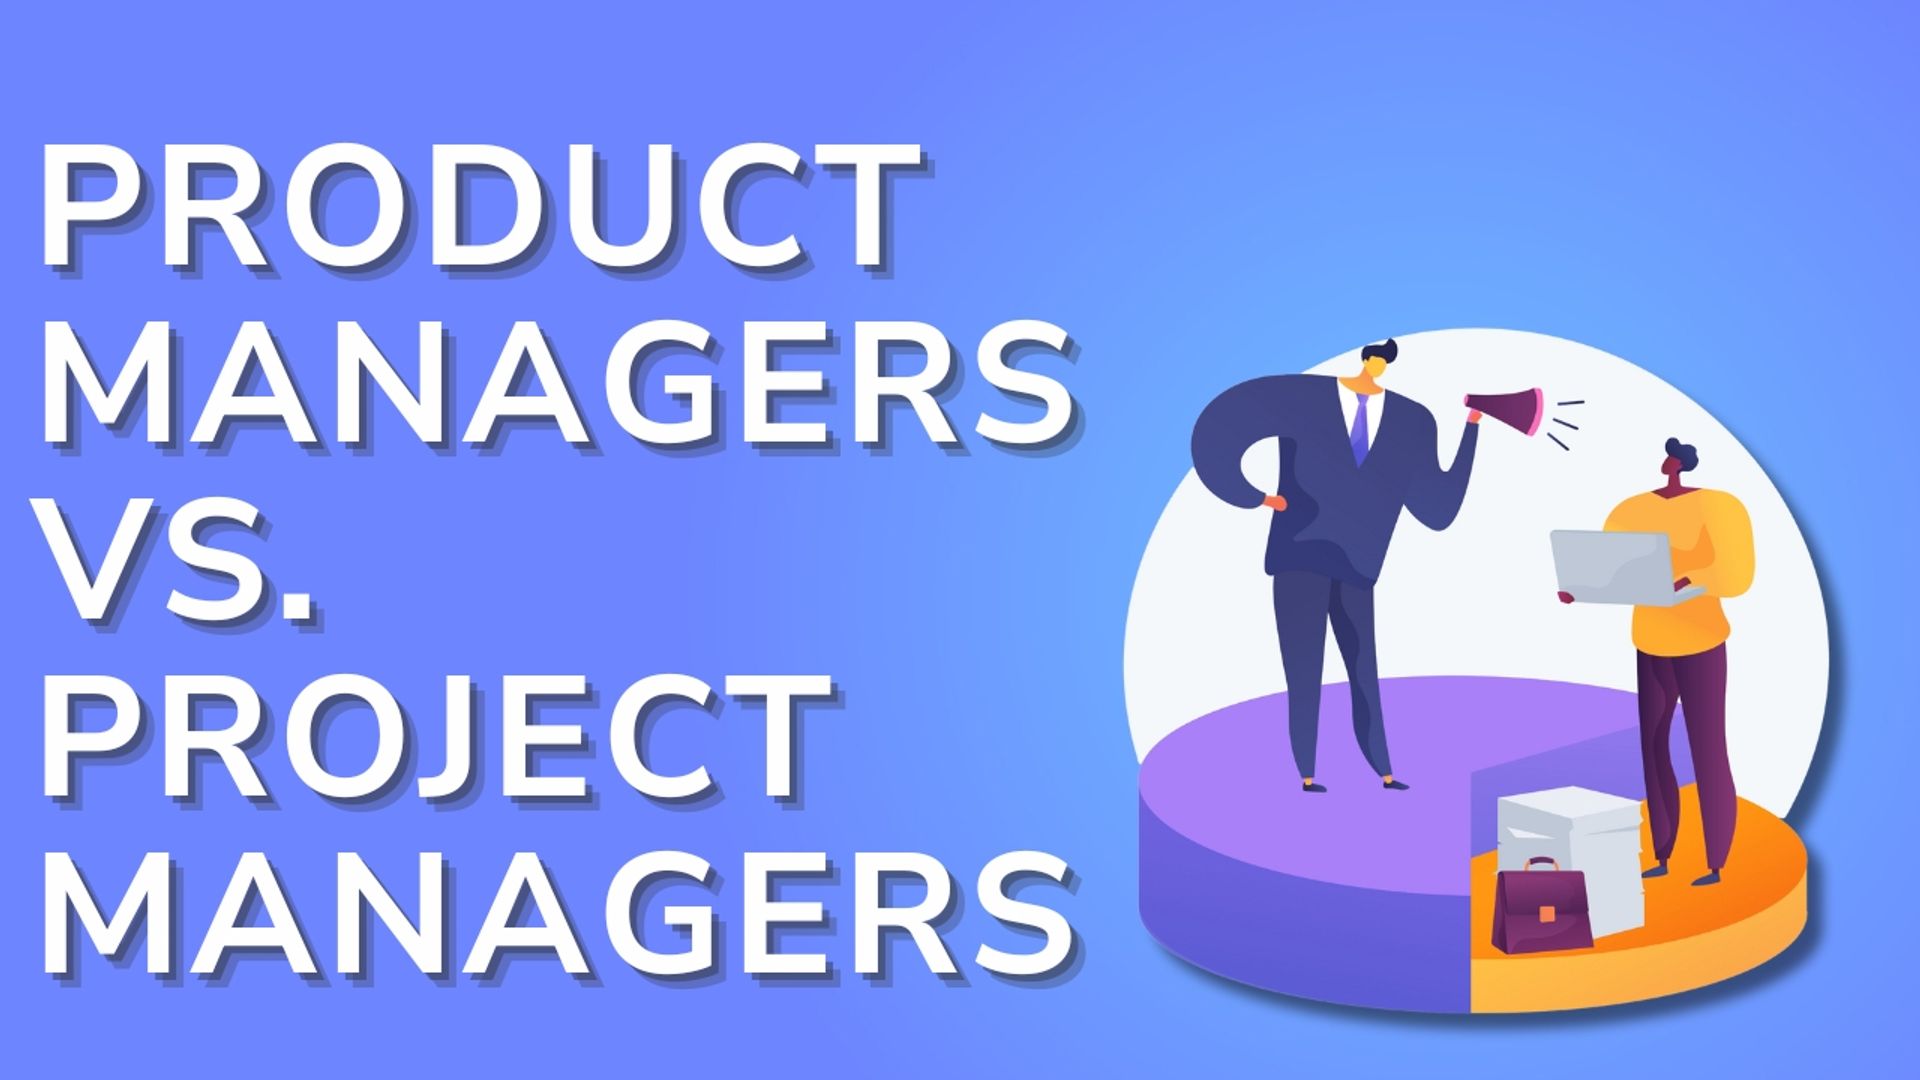 Product Managers vs. Project Managers